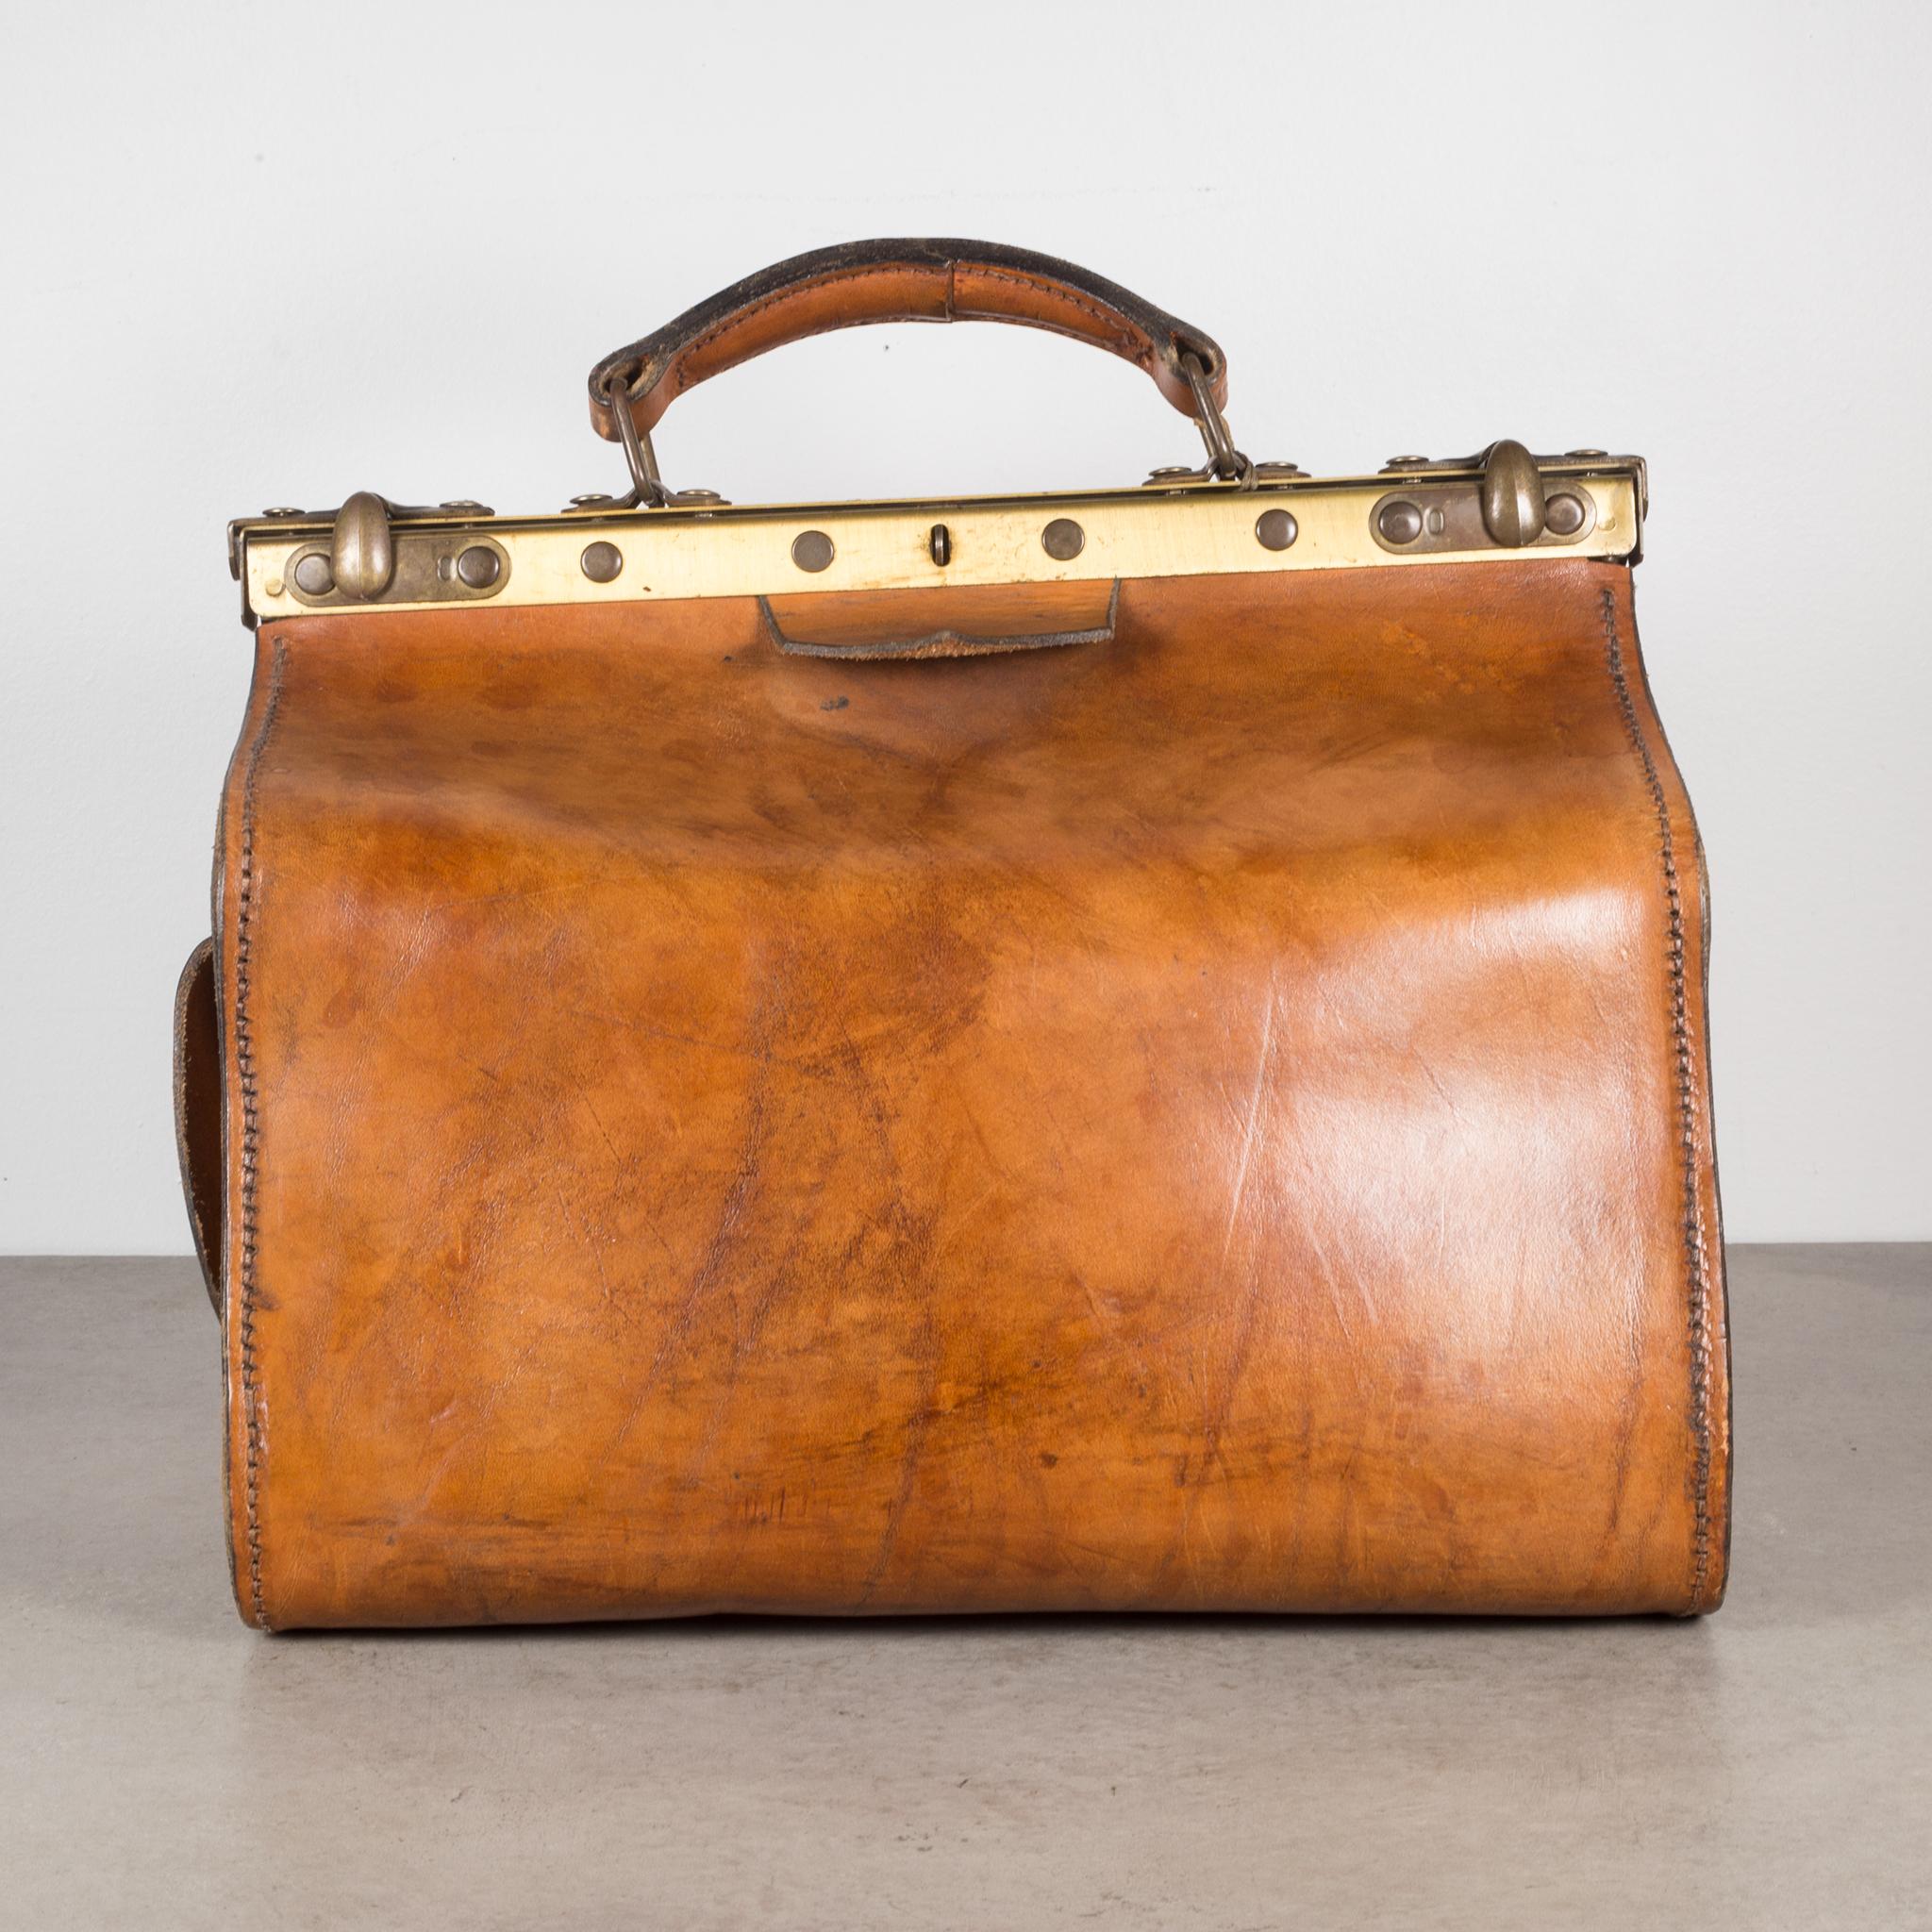 Industrial Leather Doctor's Examination House Call Bag c.1930-1940